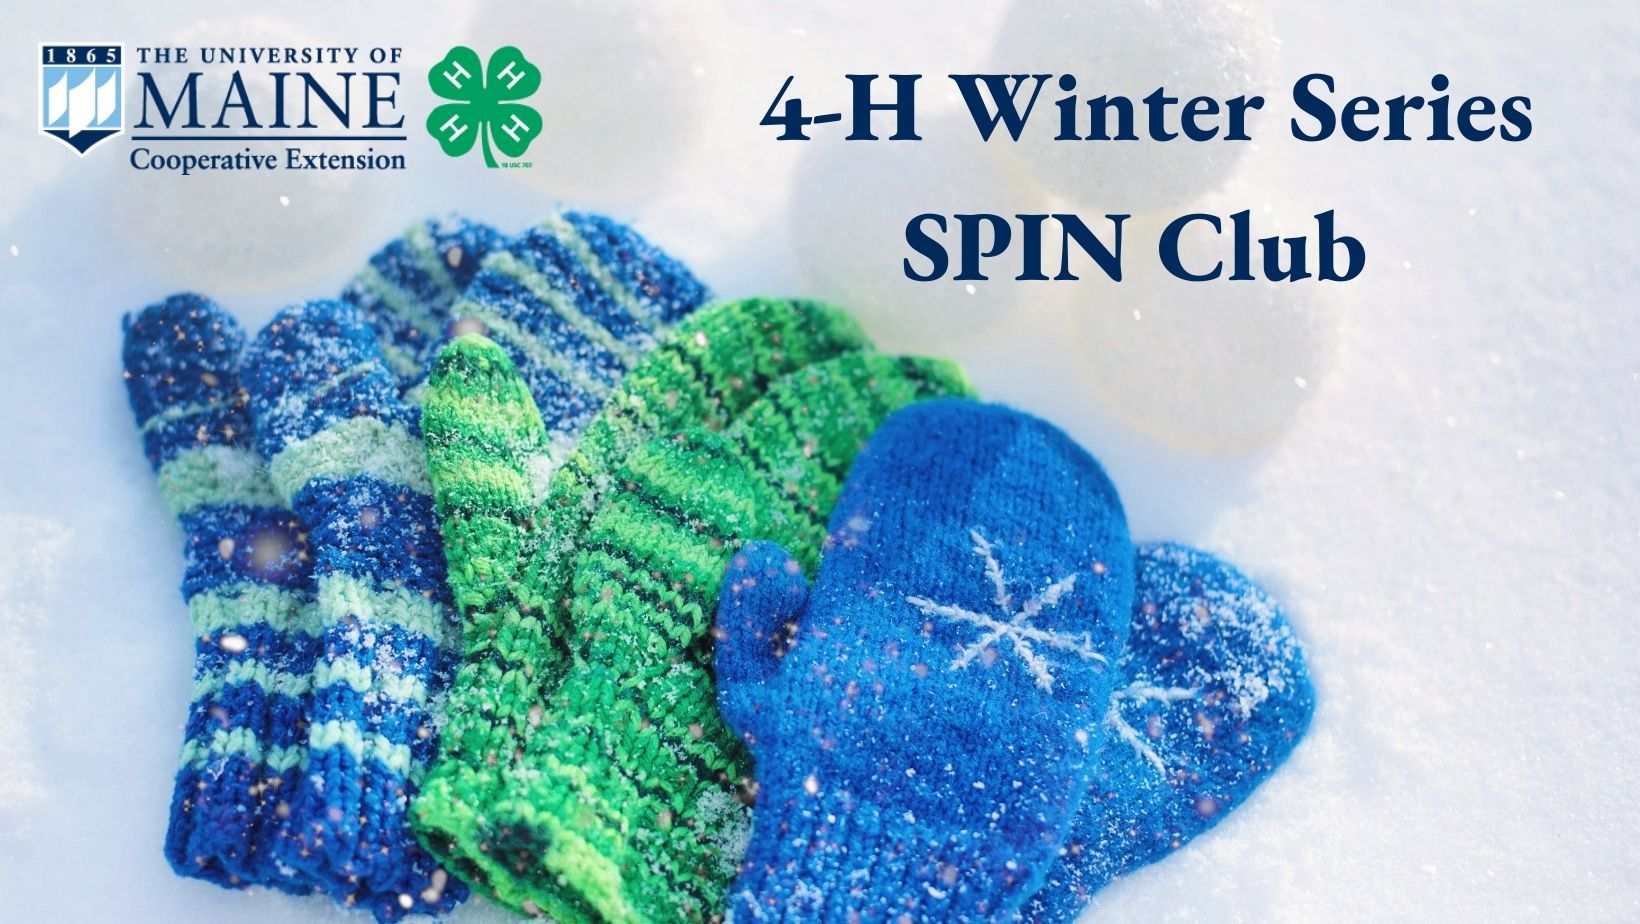 UMaine Extension 4-H logo, words "4-H Winter Series SPIN Club", blue and green mittens